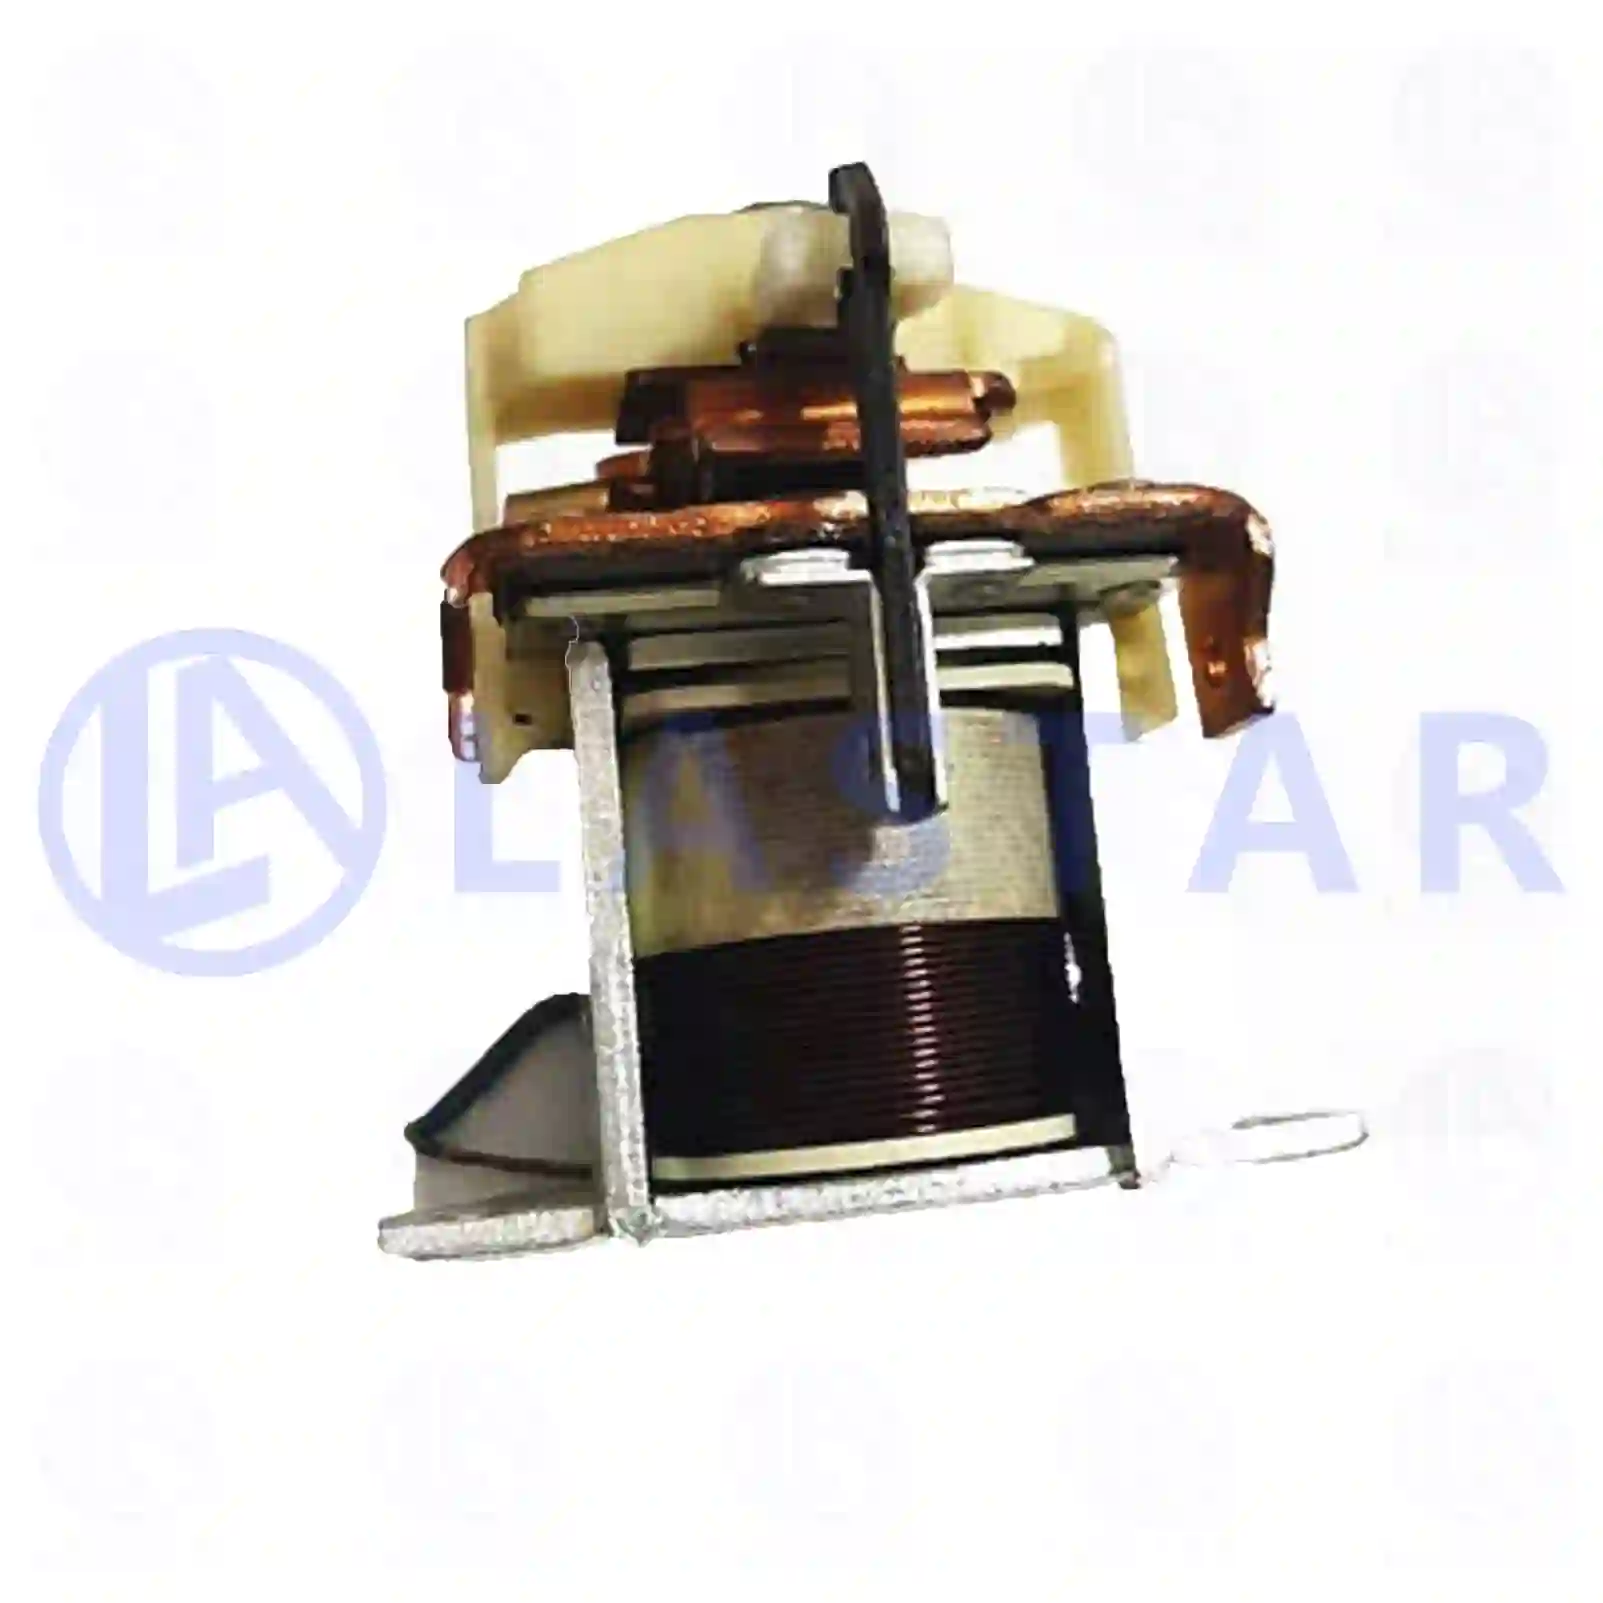 Starter Motor Solenoid switch, la no: 77710144 ,  oem no:2Y-2398, 0252121, 25212, 252121, 08122156, 4792460, 00992070, 08122156, 09920700, 61653567, 61654784, 75207433, 79052266, 79850018, 81221560, 82274433, 1614545, 6107233, 82DB-11450-AA, 82DB-11K134-AA, W841889, 460351, 79052266, 01298826, 00992070, 79052266, 79850018, 852274433, 81221560, 82274433, 610712308, 81262120012, 81262120028, 0001524210, 0011528810, 008001740003, 905720308021, W0841889, 7701004961, 296190752, 7701004961, 210995, 7701004961, 61500090723, 009920700, 061653567, 061654784, 240493, 7240493, ZG20915-0008 Lastar Spare Part | Truck Spare Parts, Auotomotive Spare Parts